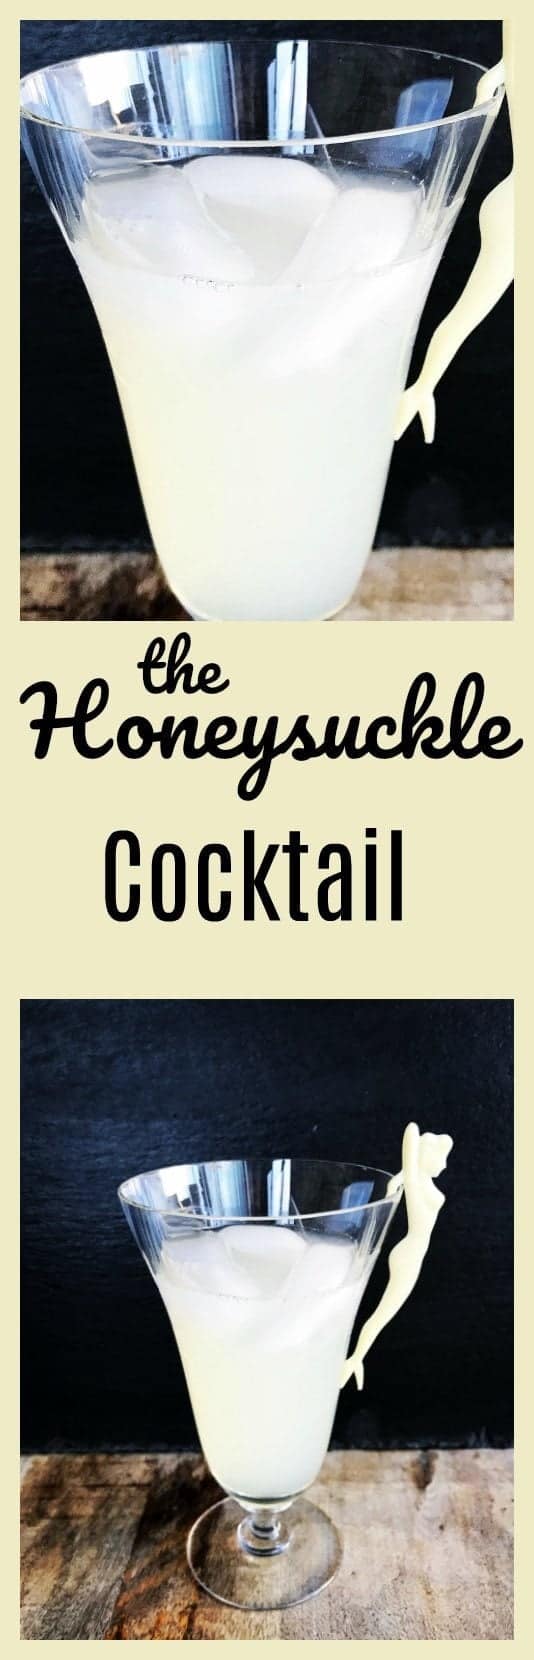 The Honeysuckle cocktail is a simple three ingredient cocktail that anyone can make. It consists of Rum, honey and lemon juice. From @kitchenmagpie